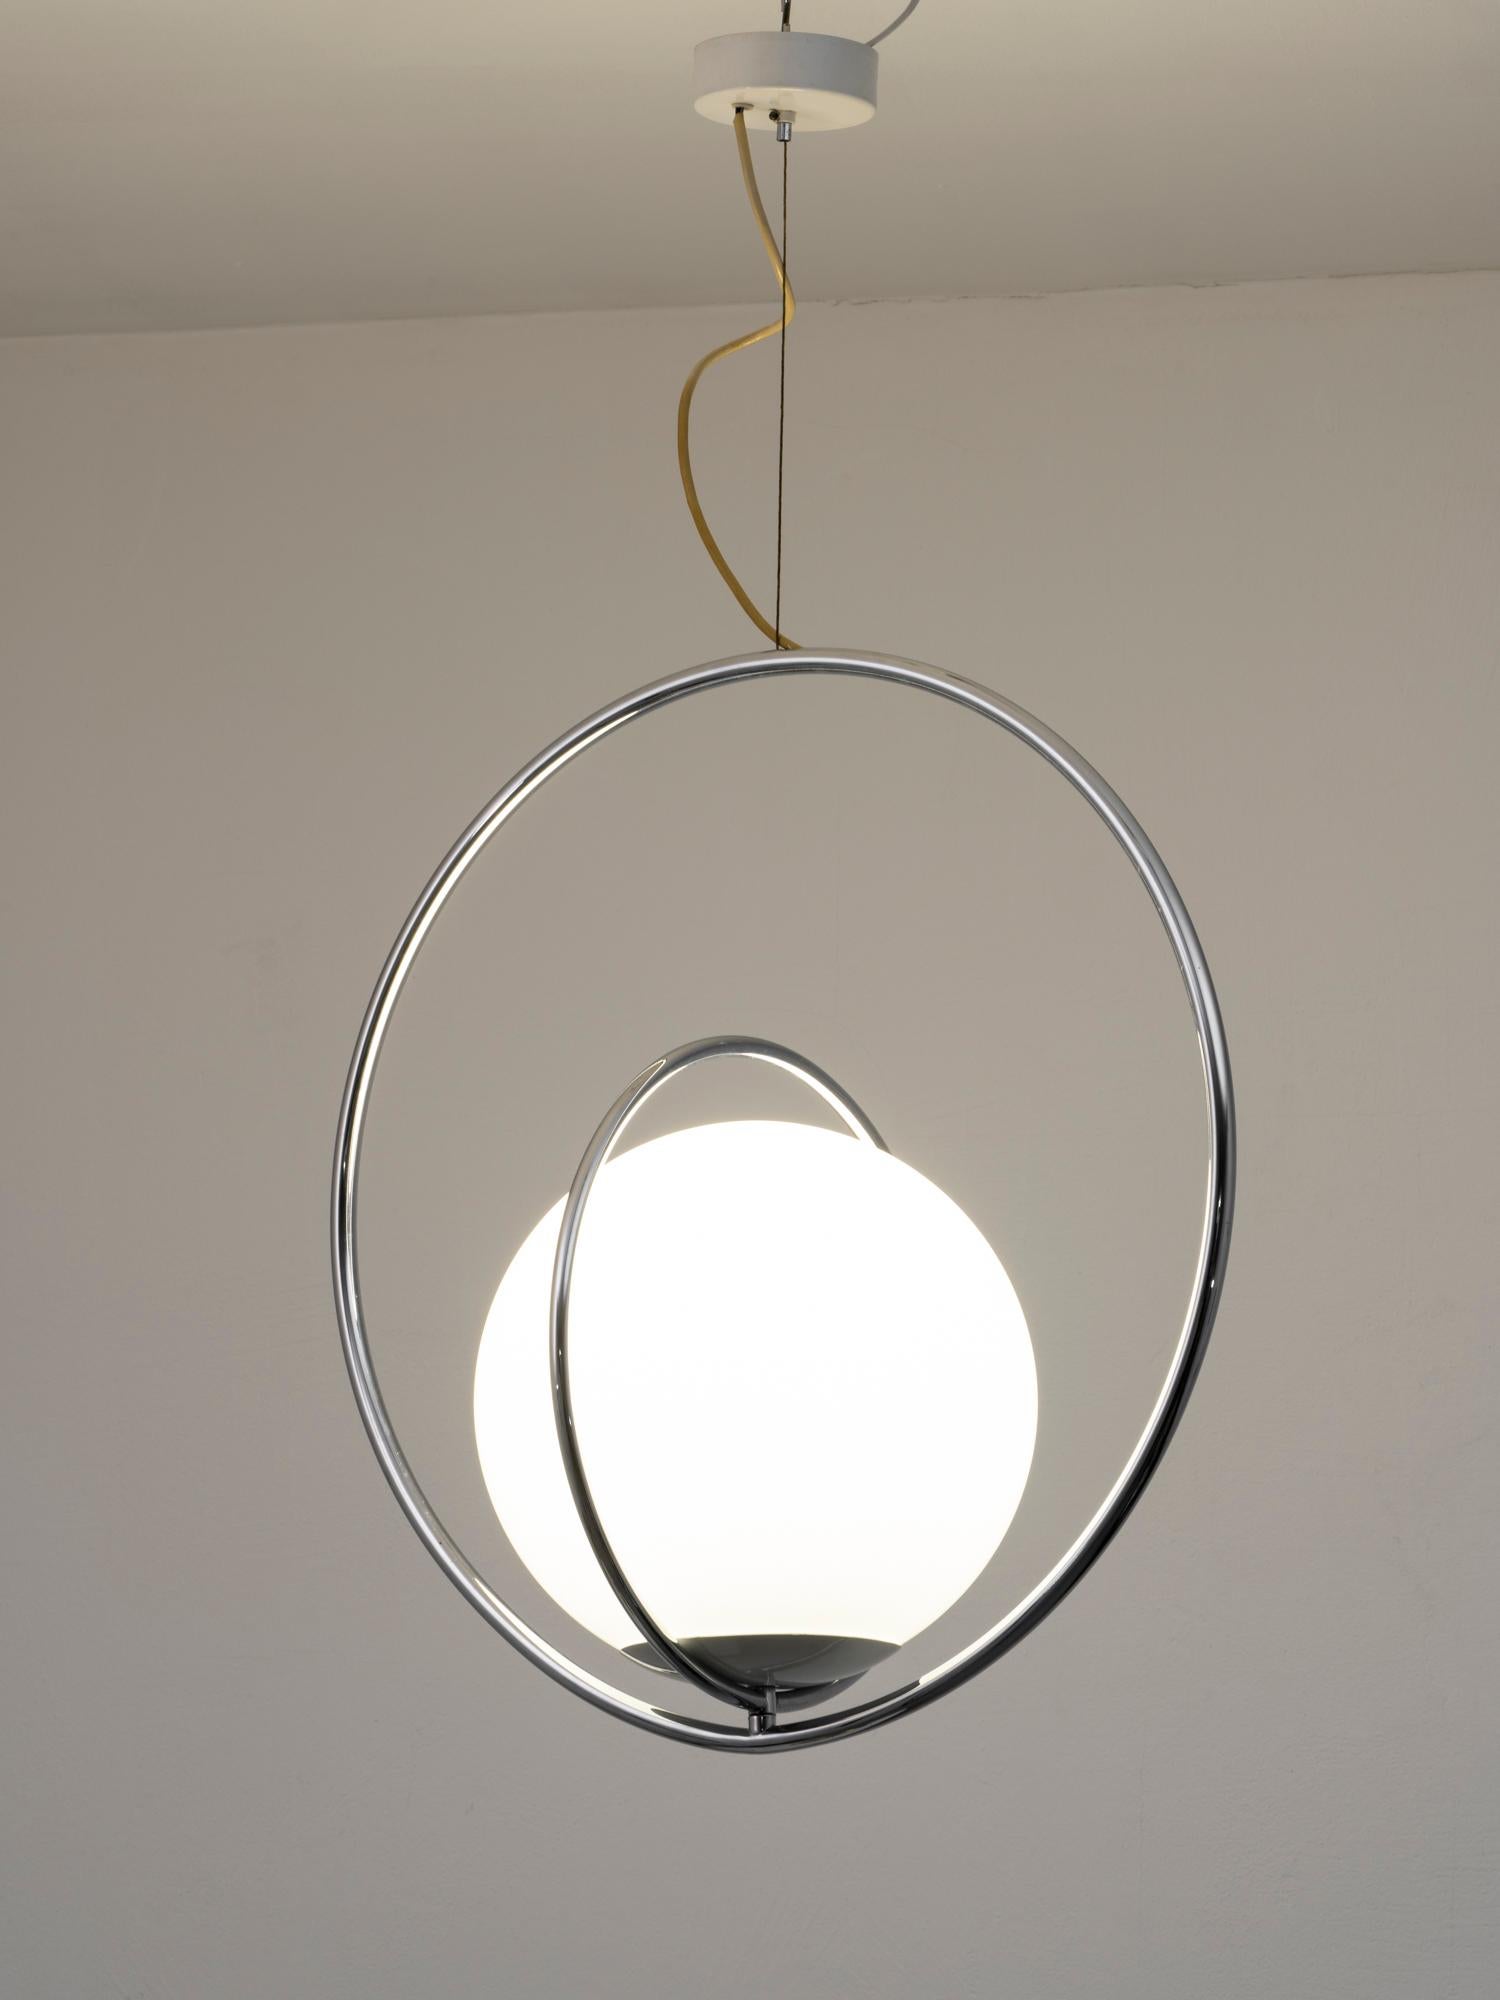 Beautiful pendant lamp by Italian designer Pia Guidetti Crippa for Lumi, from the early 1970s. This lamp is composed by two revolving rings in chrome-plated metal, that can create different shapes, and a opal glass. It hangs on a metal wire. This